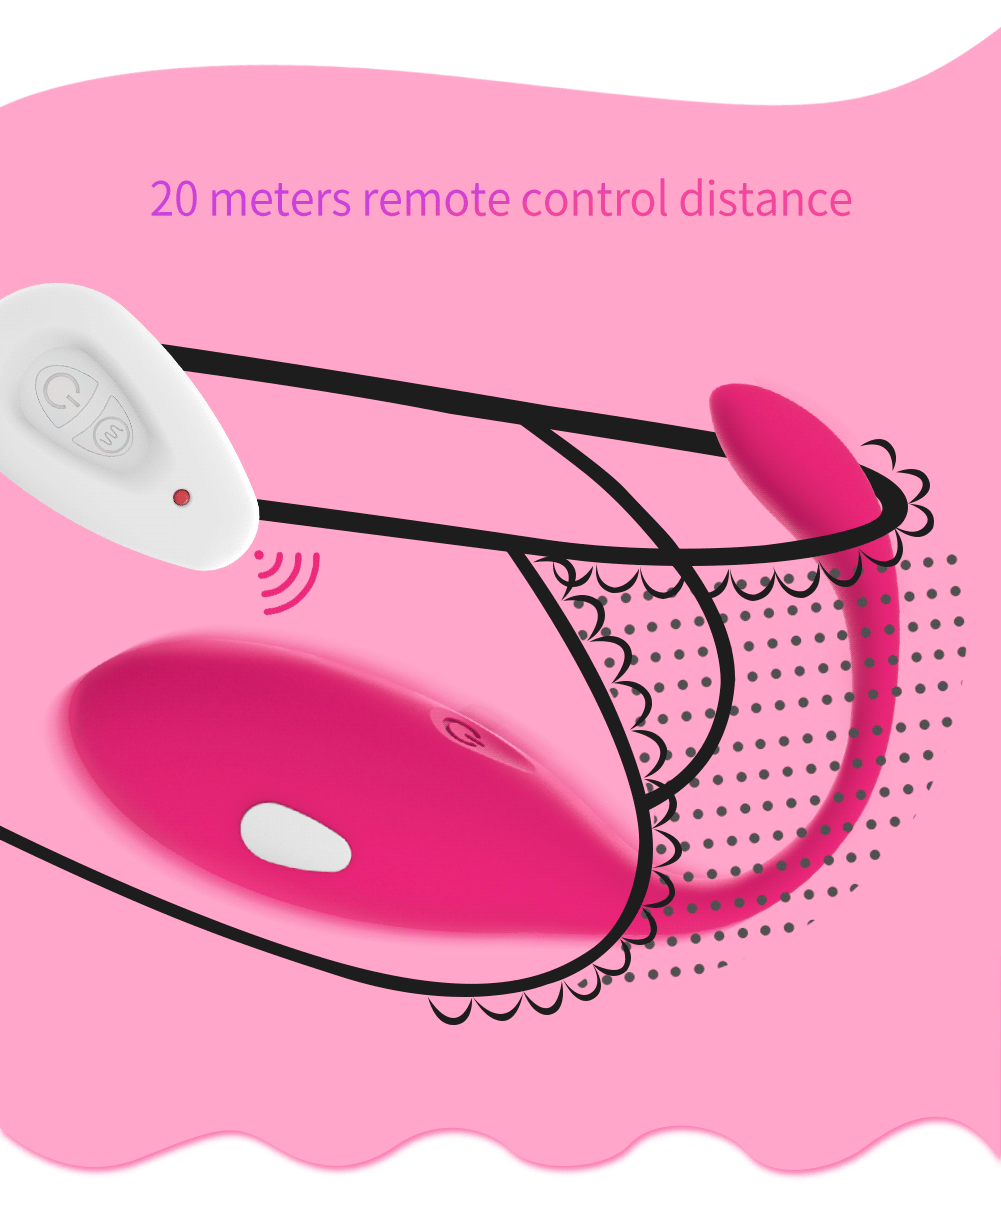 Lovense Lush 2 with 20 meters remote control distance